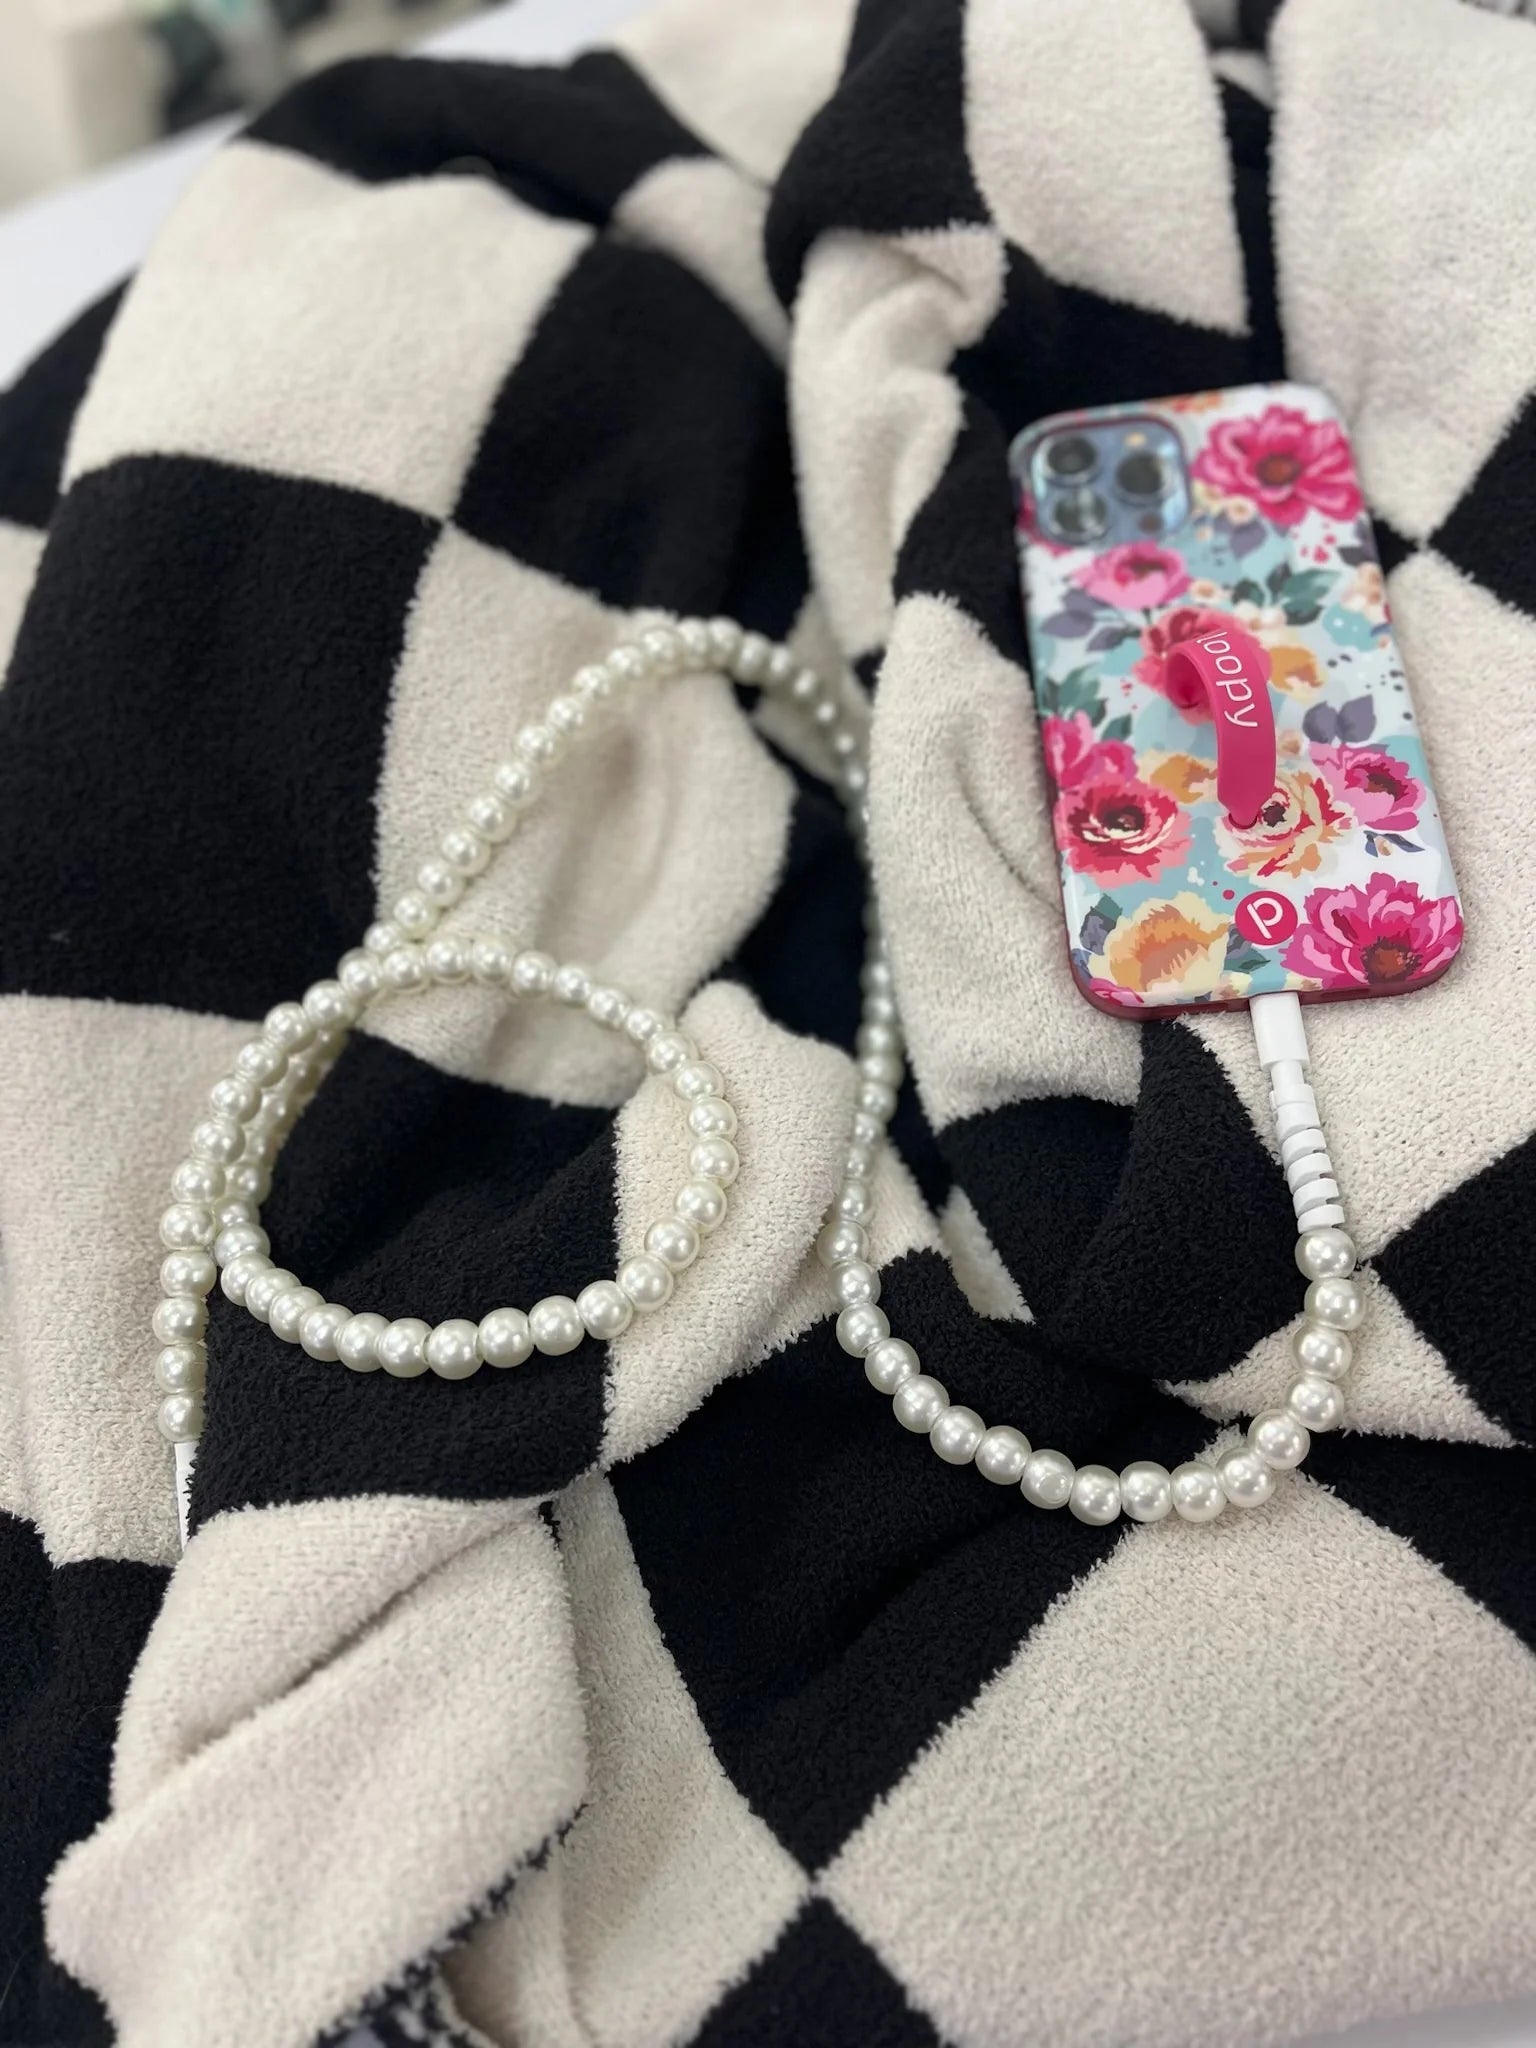 Pearl Chargers - CountryFide Custom Accessories and Outdoors